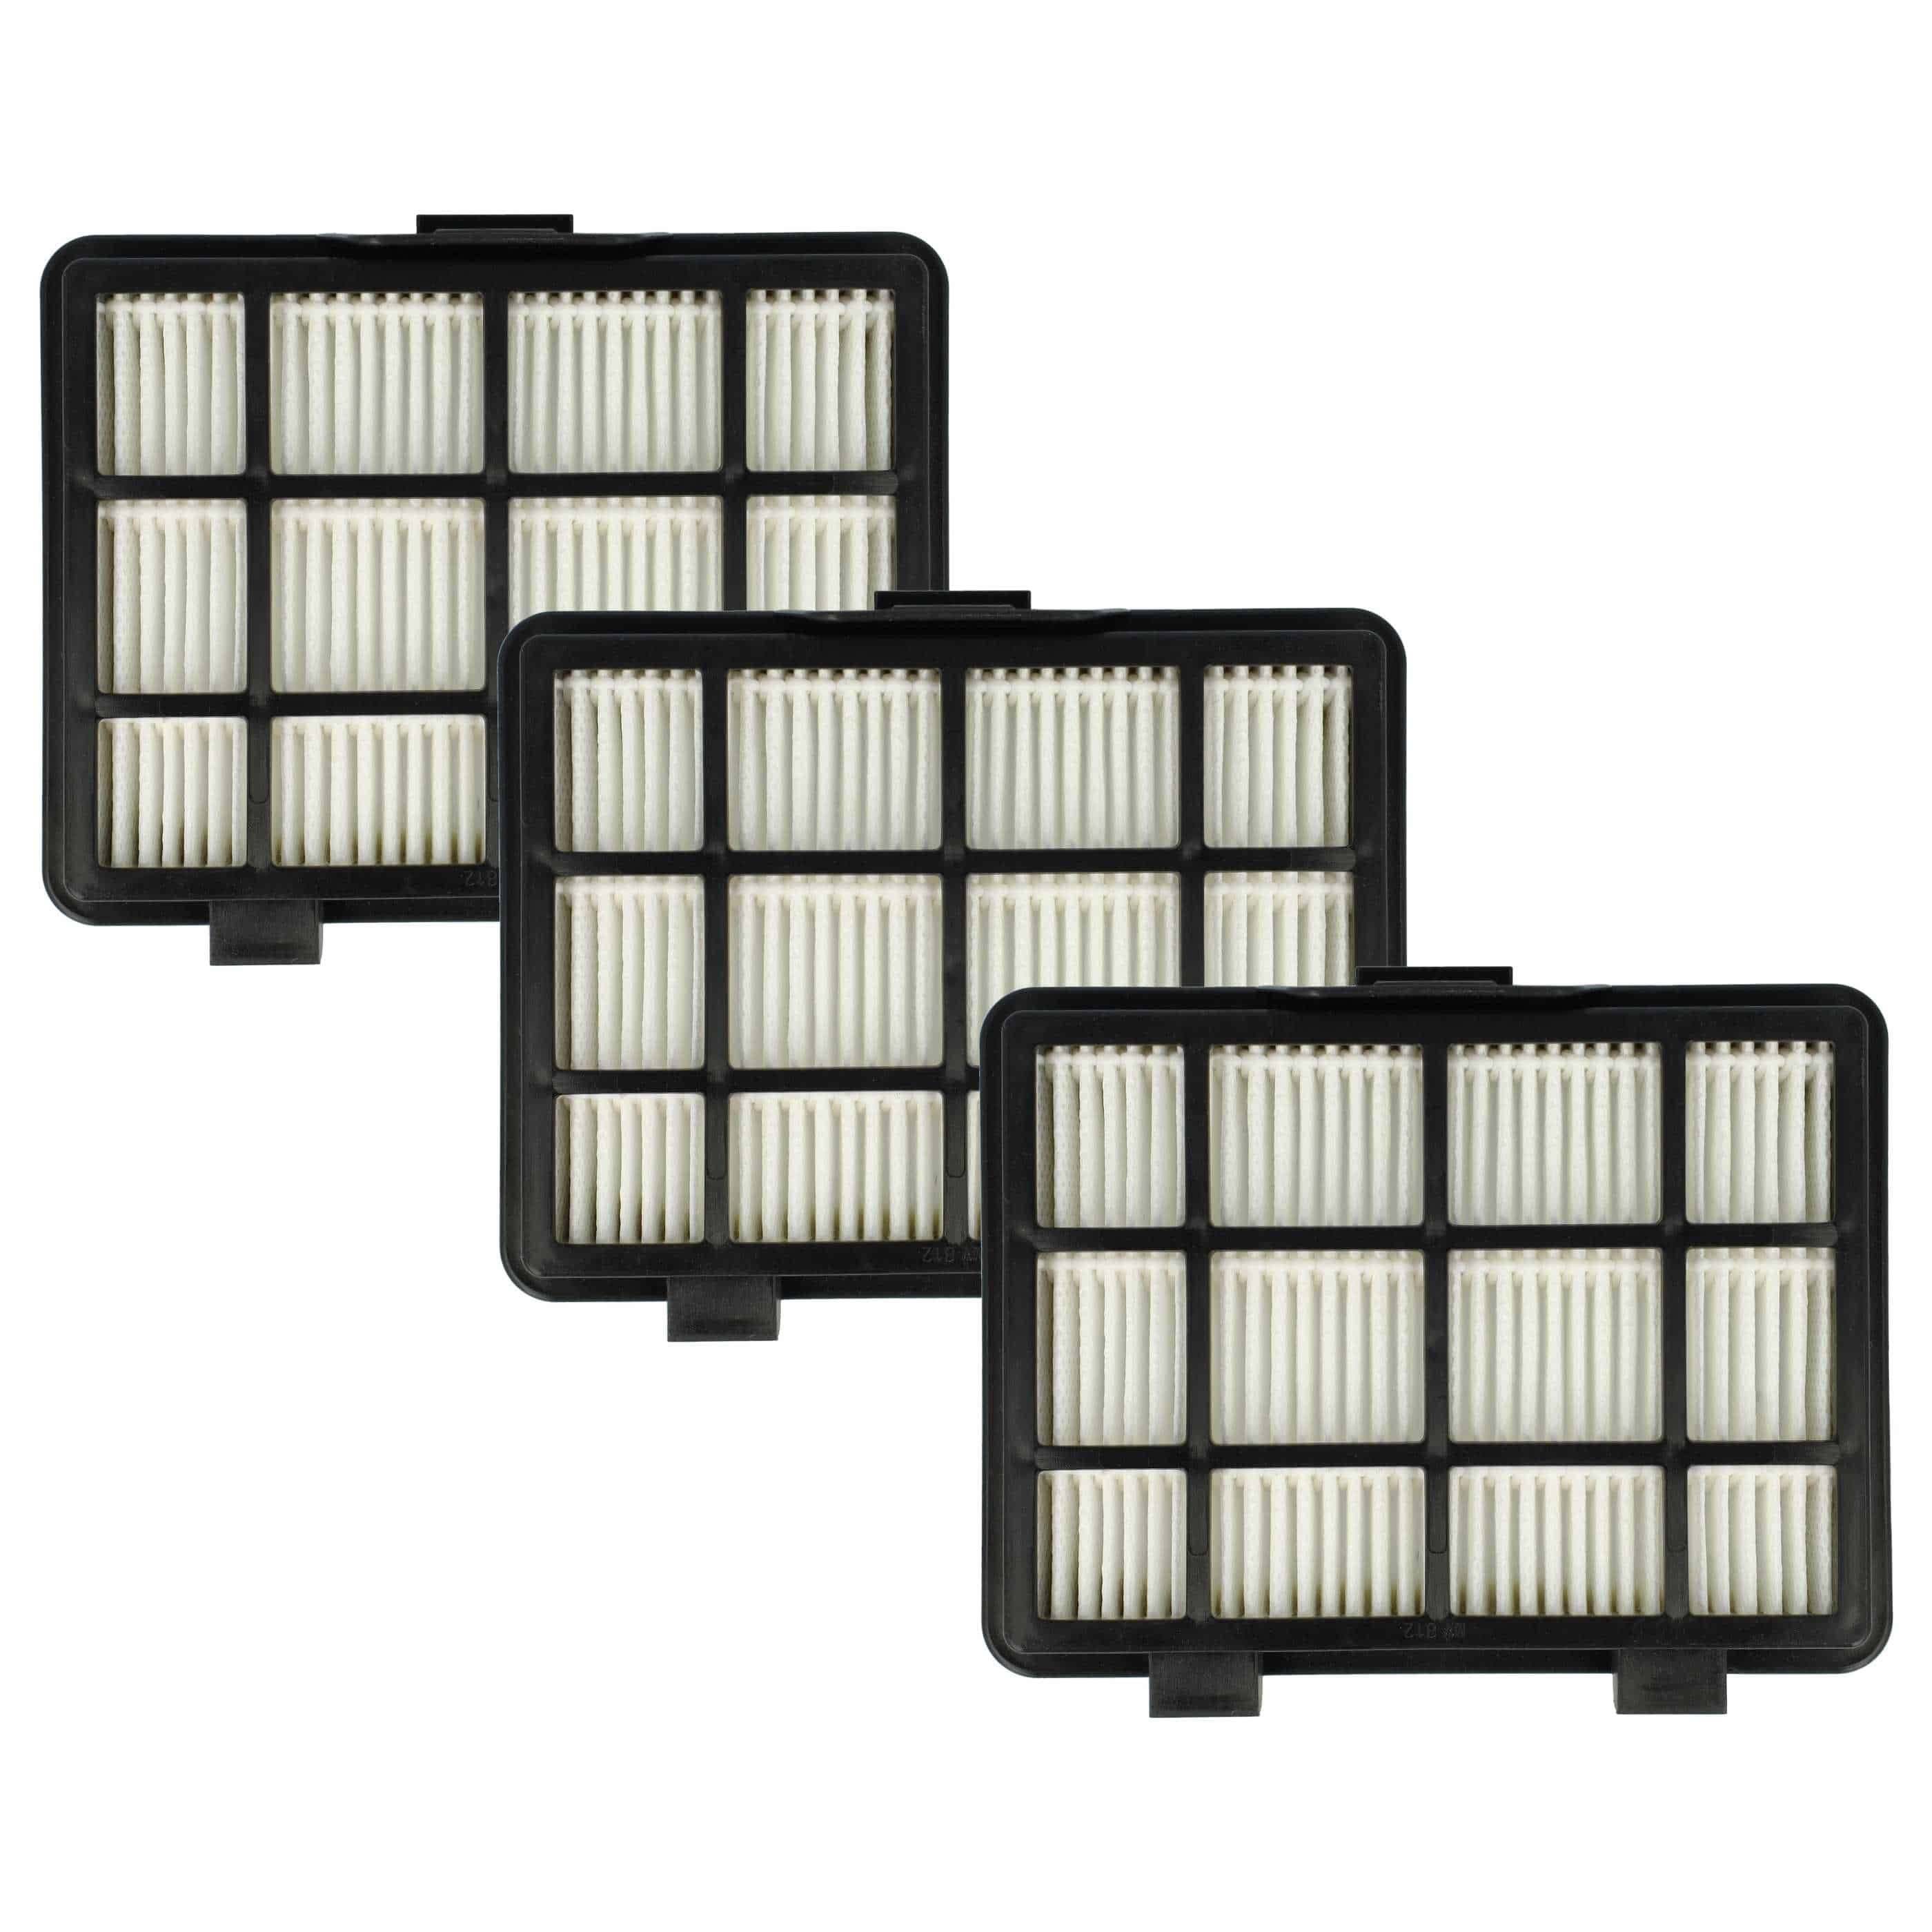 3x HEPA filter replaces Bosch 17001740 for Bosch Vacuum Cleaner